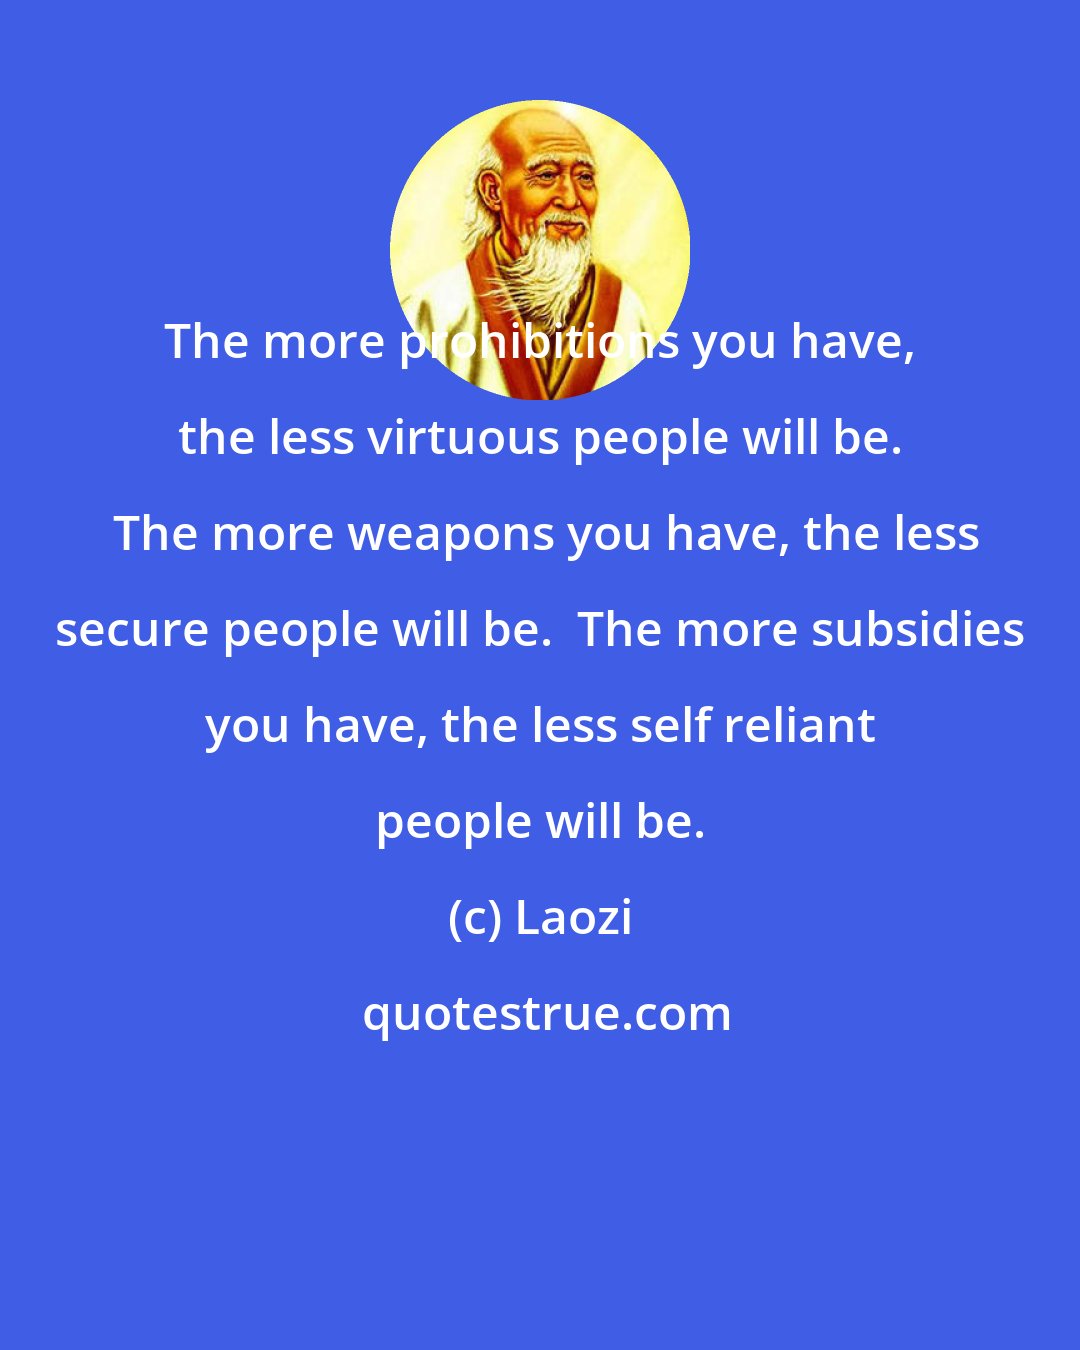 Laozi: The more prohibitions you have, the less virtuous people will be.  The more weapons you have, the less secure people will be.  The more subsidies you have, the less self reliant people will be.